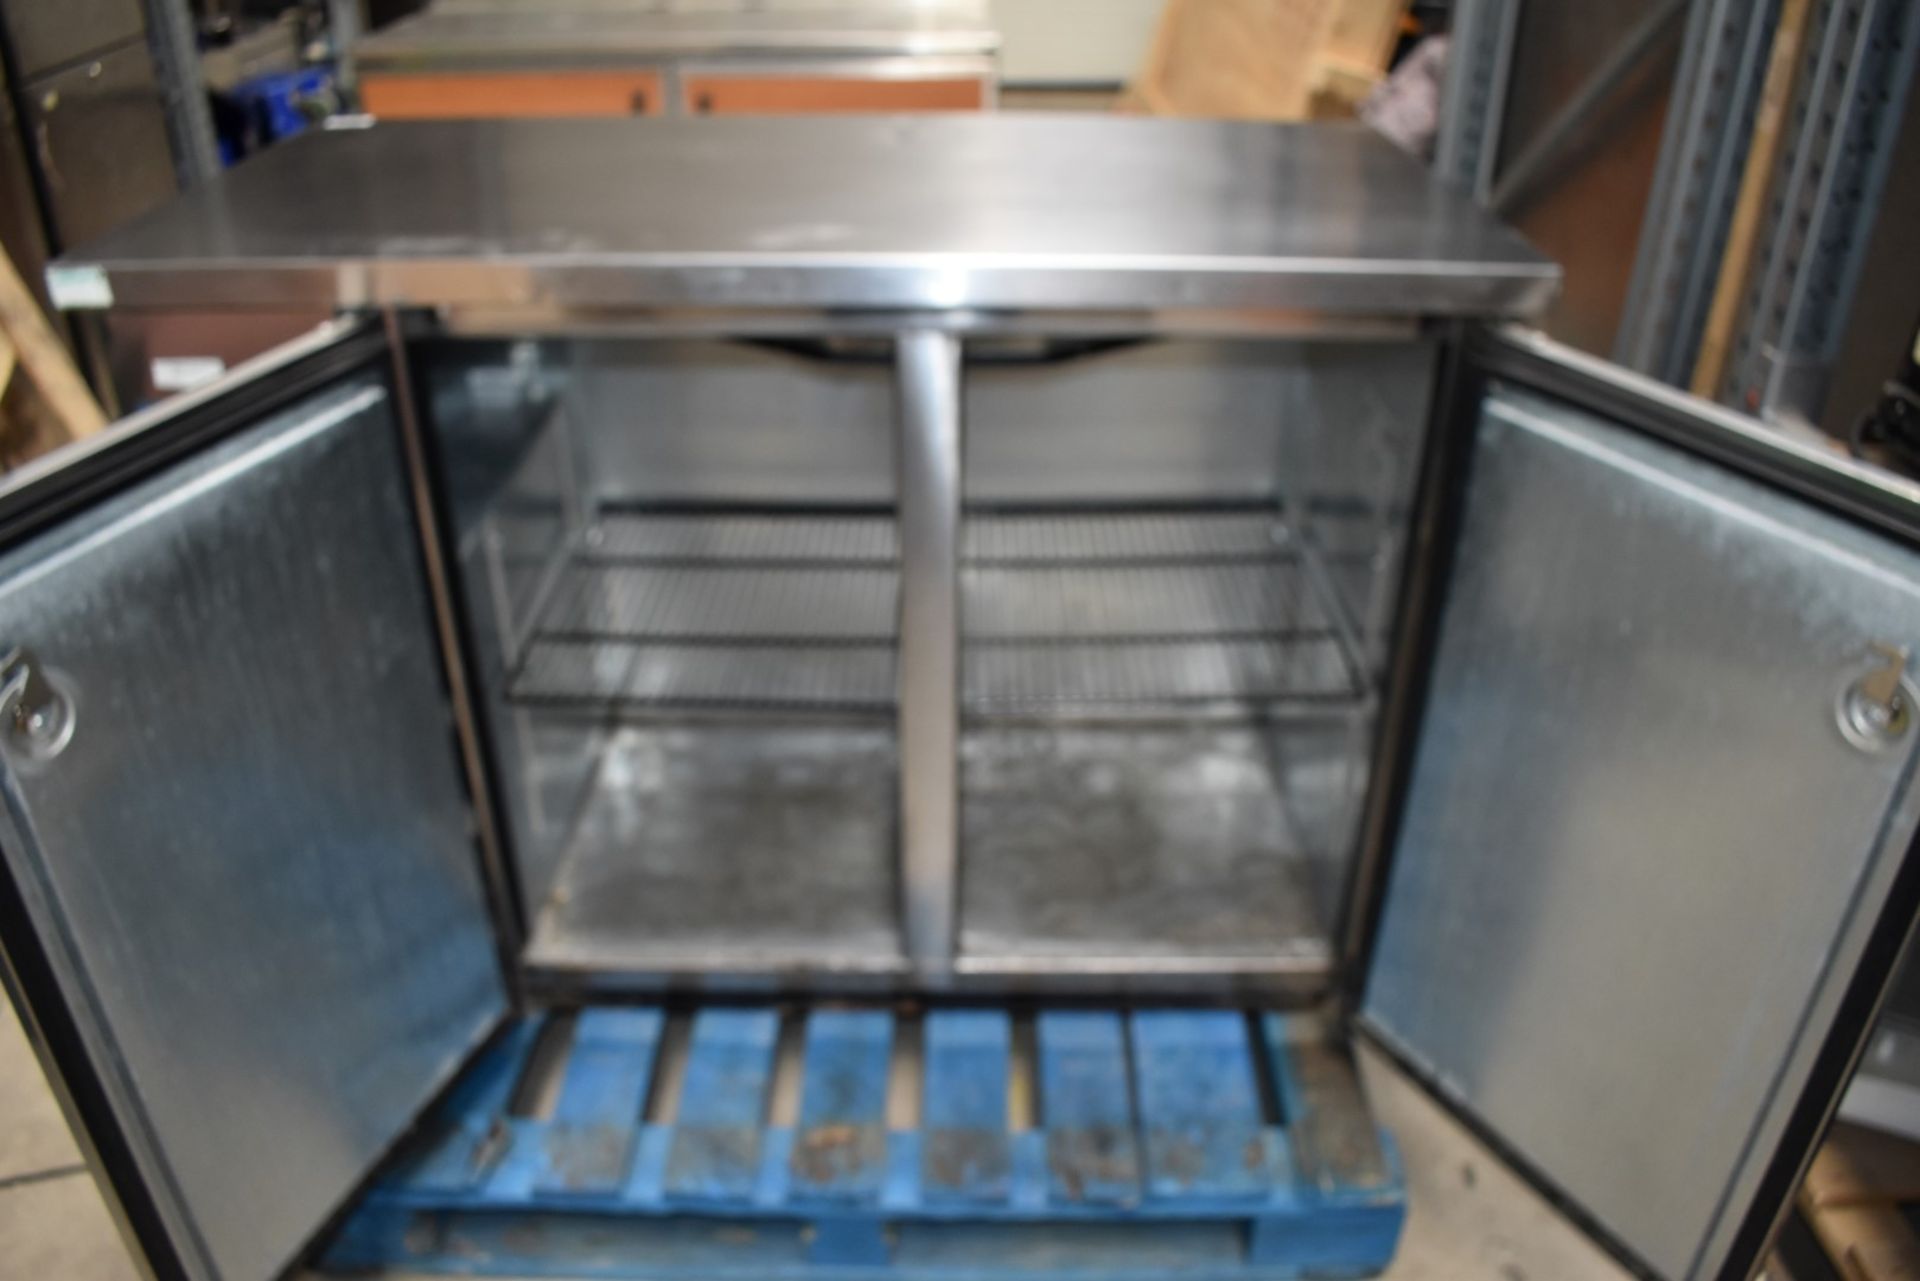 1 x True Back Bar Bottle Cooler With Solid Stainless Steel Doors and Counter Top - Model TBB-24-48-S - Image 6 of 10